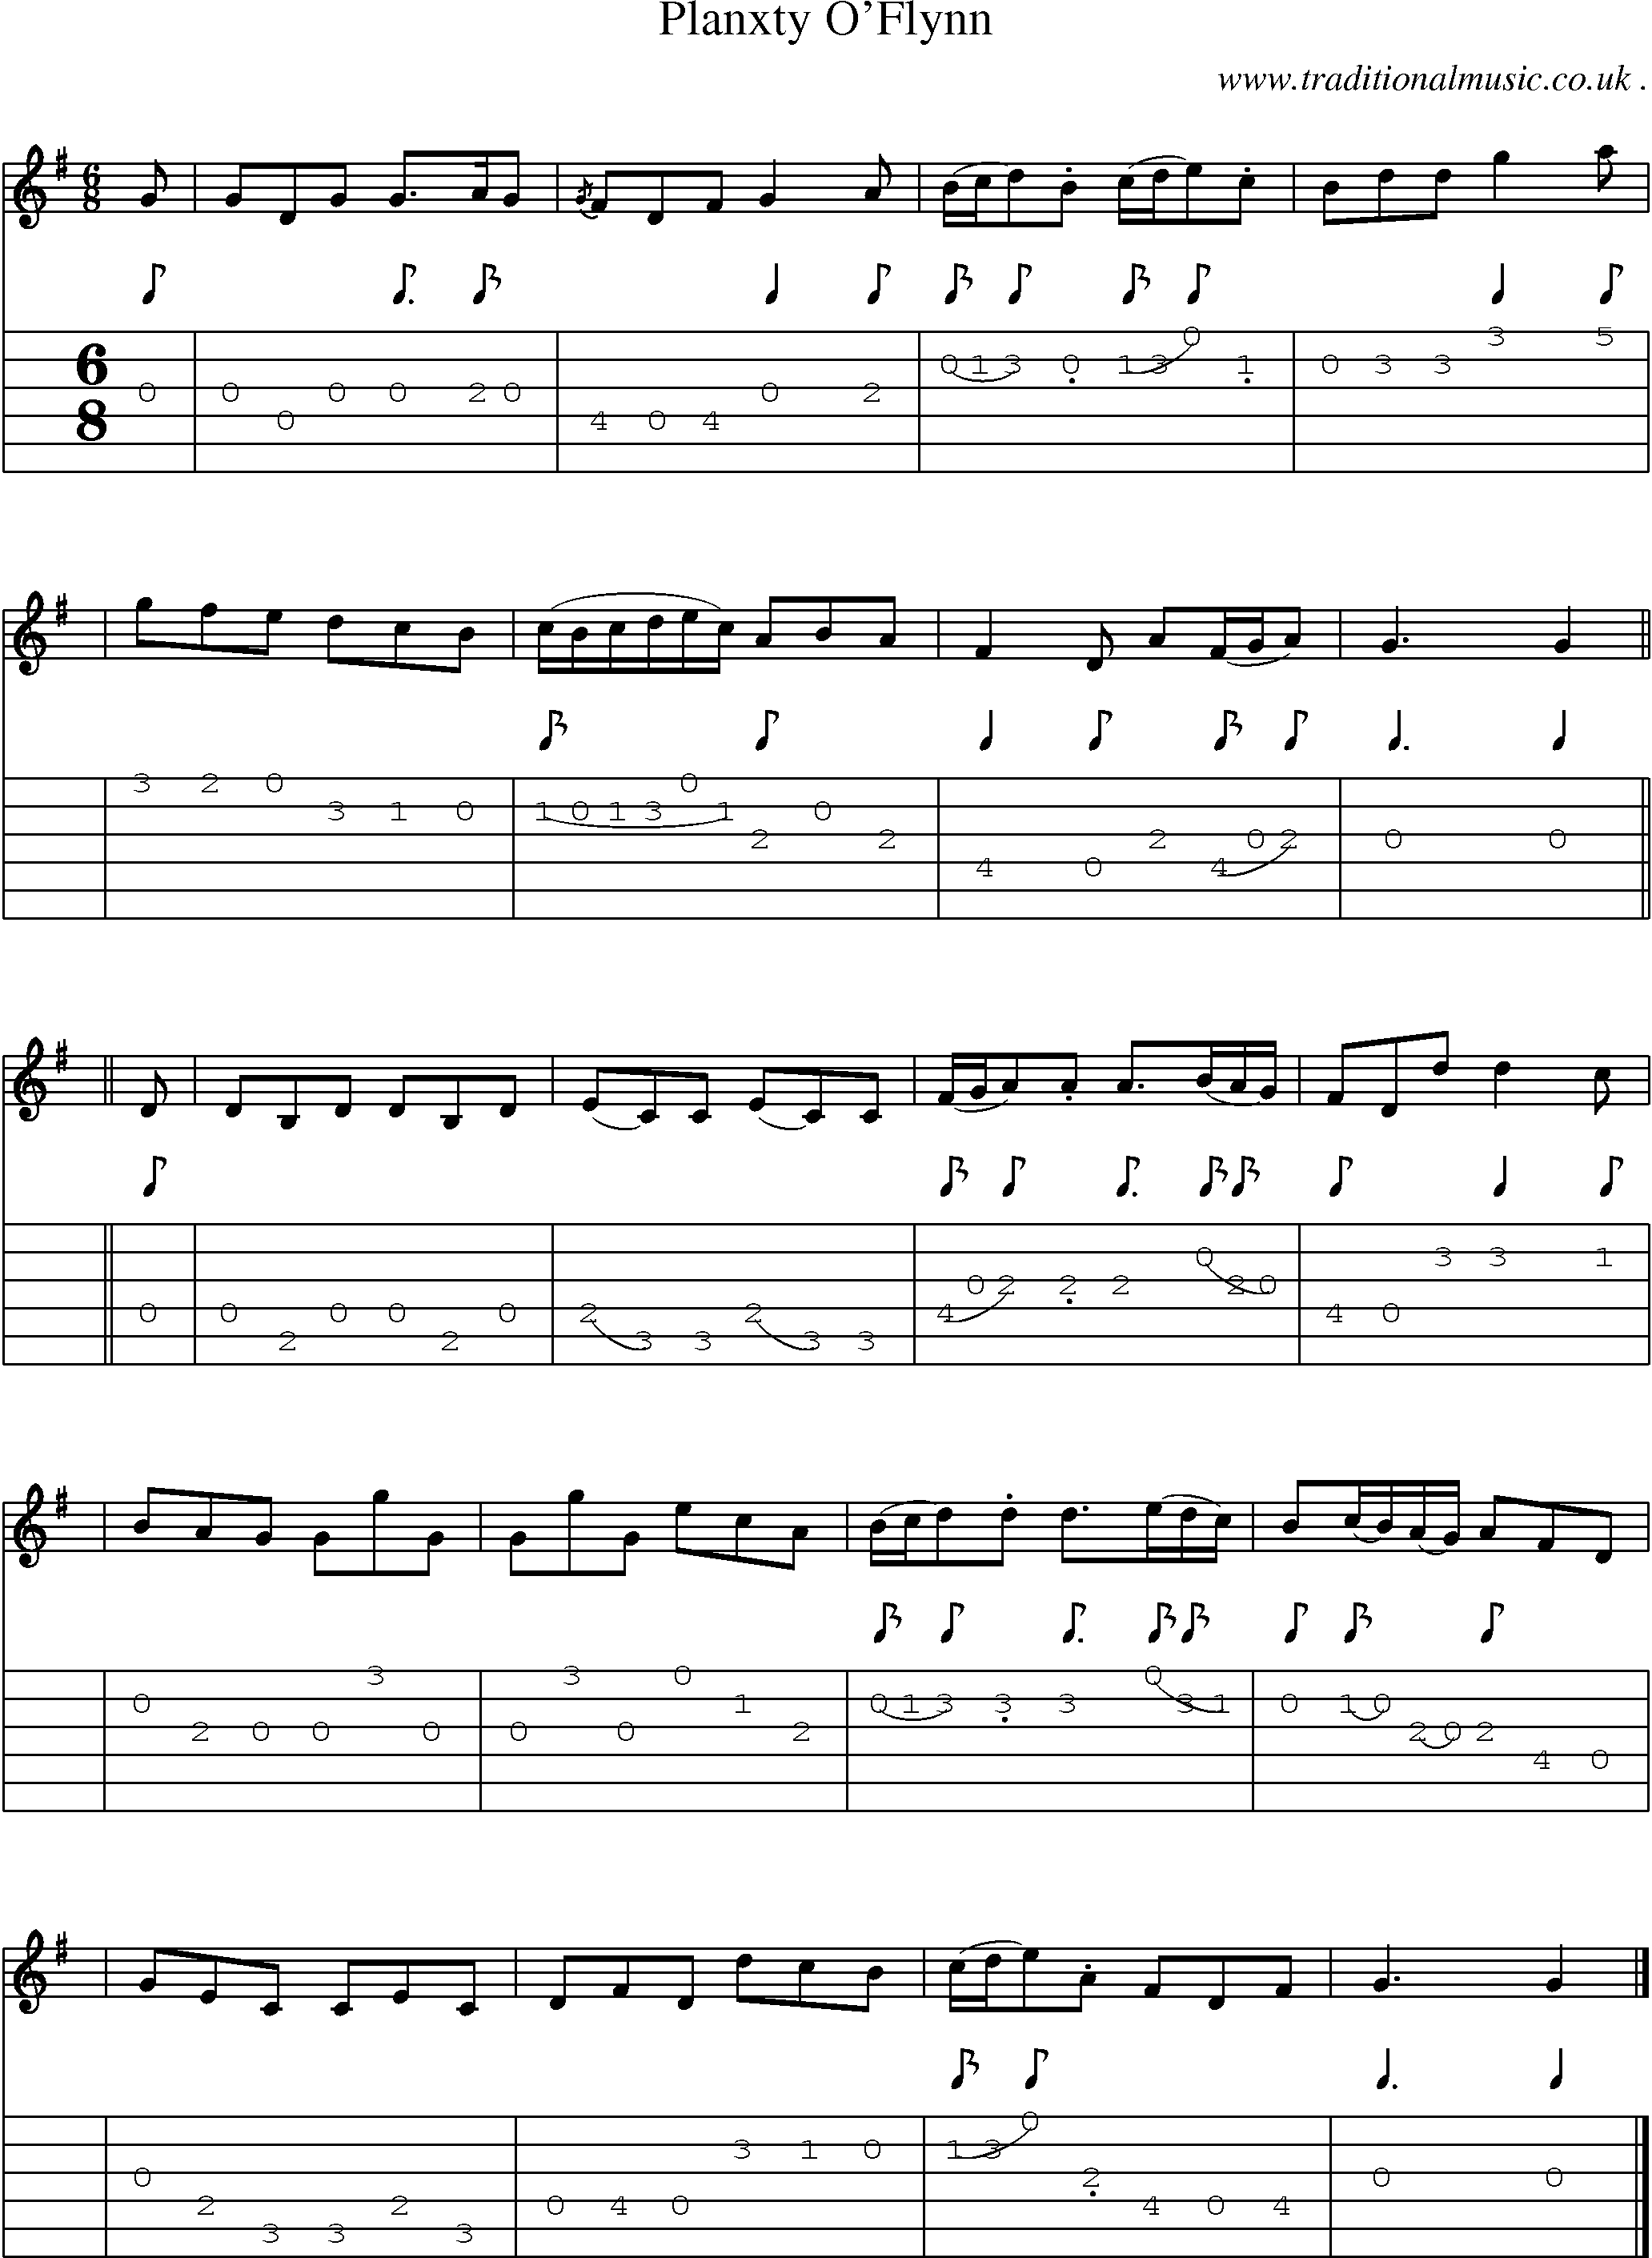 Sheet-music  score, Chords and Guitar Tabs for Planxty Oflynn